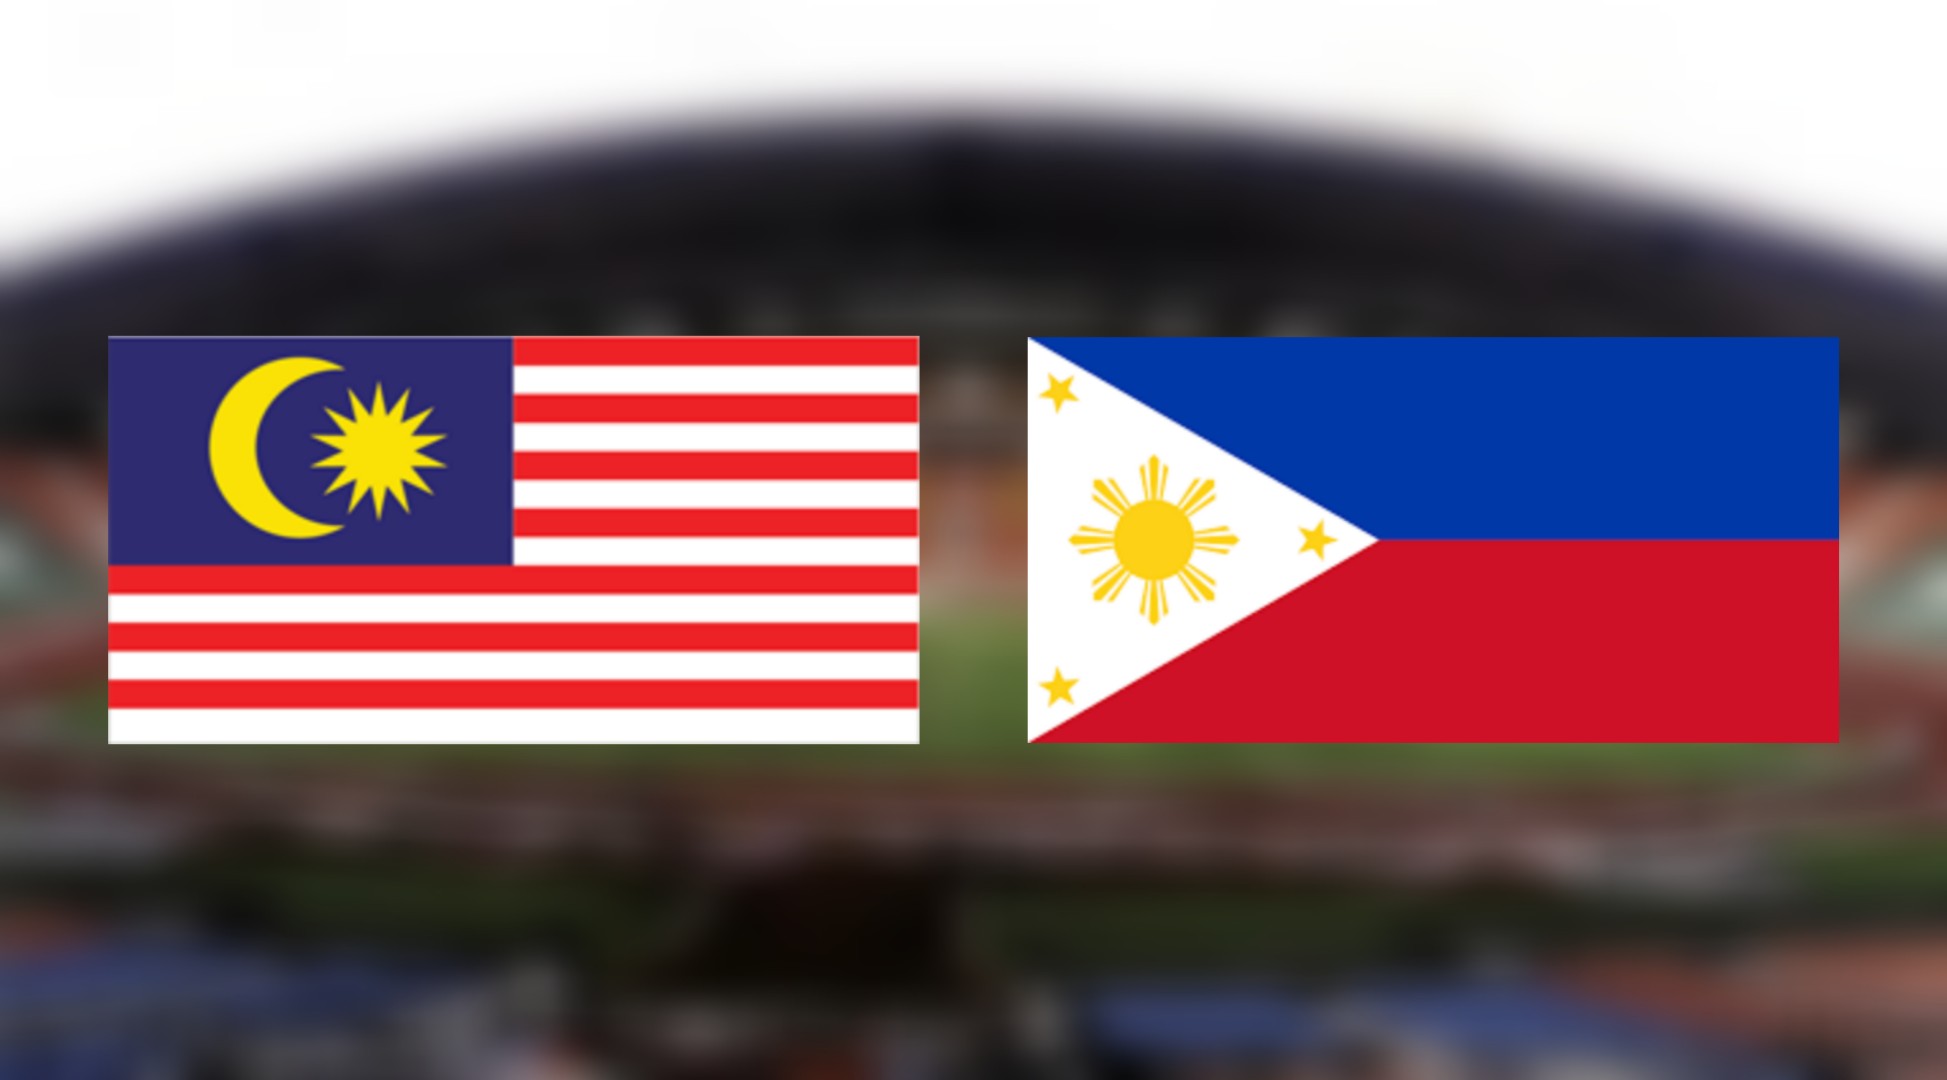 Malaysia vs philippines live streaming